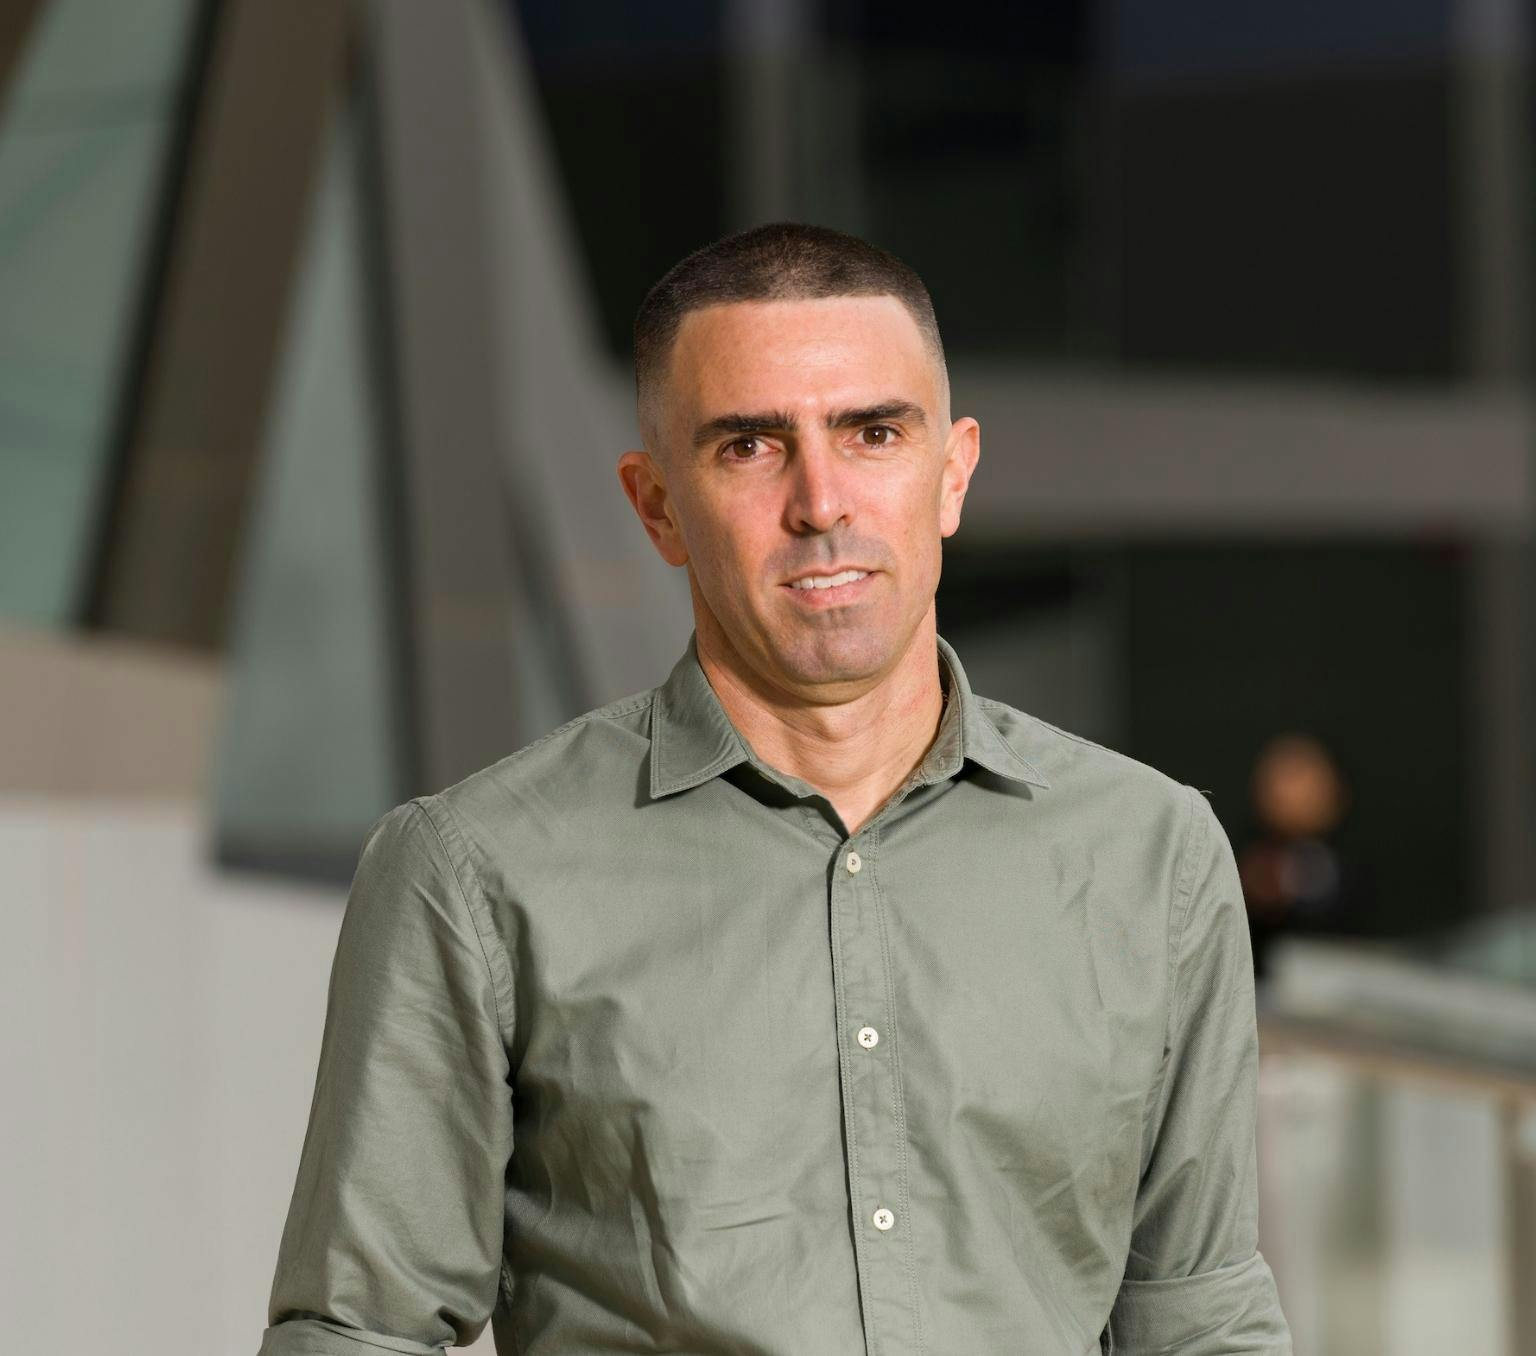 Jason is wearing a khaki coloured collared shirt. He is looking past the camera. Behind him is a blurred background of a building.